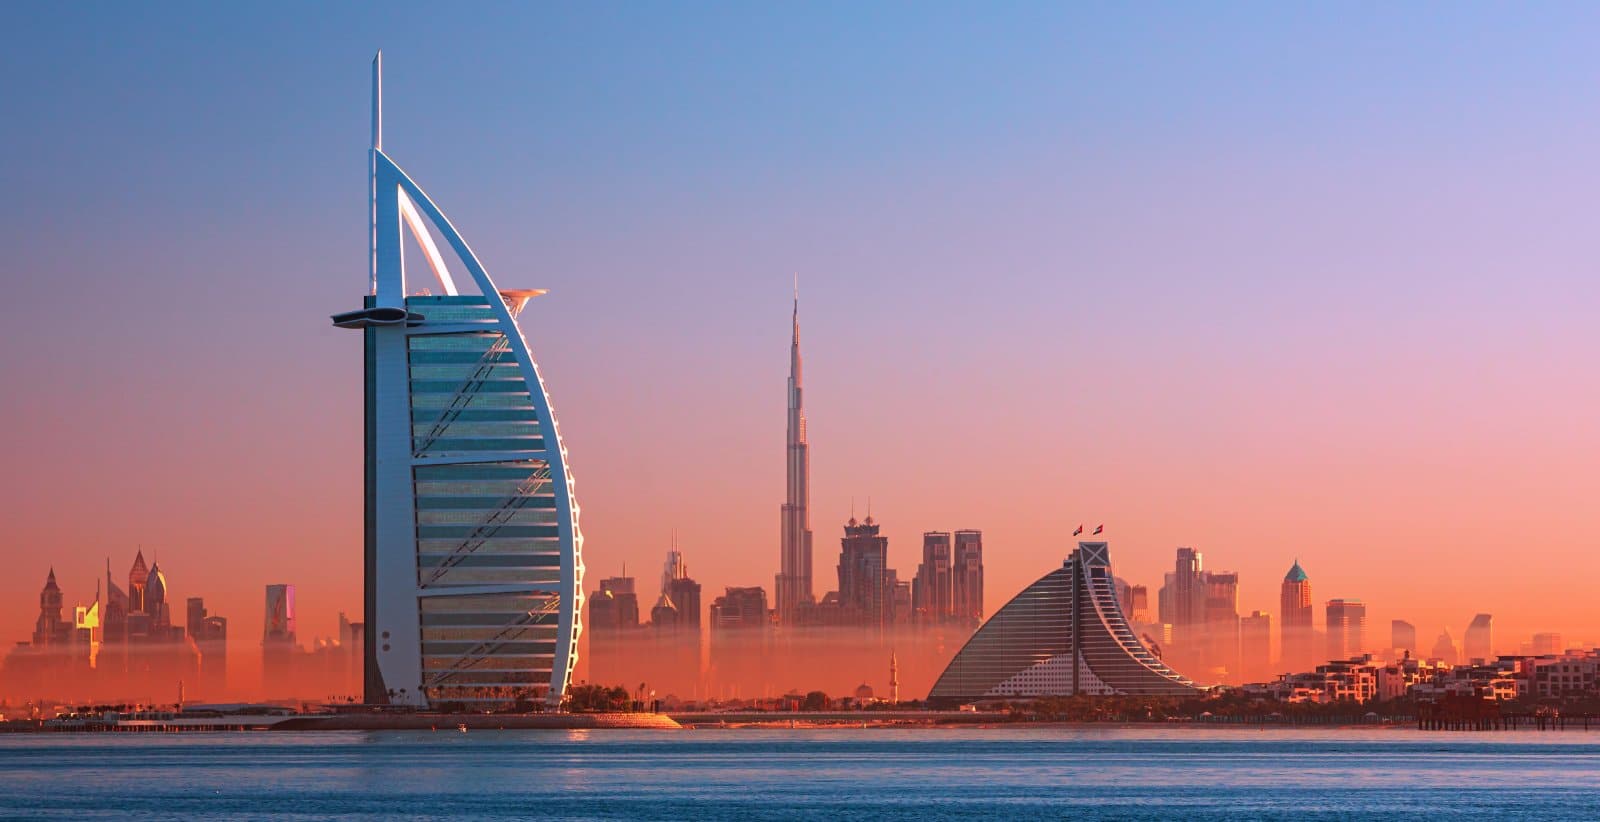 <p class="wp-caption-text">Image Credit: Shutterstock / Rasto SK</p>  <p><span>Dubai’s skyline, showcasing architectural ambition, is just the beginning of what this cosmopolitan city offers. As a global hub of innovation and luxury, Dubai presents an array of experiences, from the adrenaline rush of skydiving over Palm Jumeirah to the tranquility of desert safaris in the vast Arabian Desert. The city’s shopping venues, from the sprawling Dubai Mall to traditional gold souks, offer a retail experience unparalleled anywhere in the world. Cultural explorers can uncover the heritage of the Al Fahidi Historical Neighbourhood or take an abra ride on Dubai Creek. The city’s culinary landscape is as diverse as its population, offering flavors from around the globe. Dubai seamlessly blends the marvels of the modern world with the traditions of the Middle East, making it a compelling destination for all.</span></p>